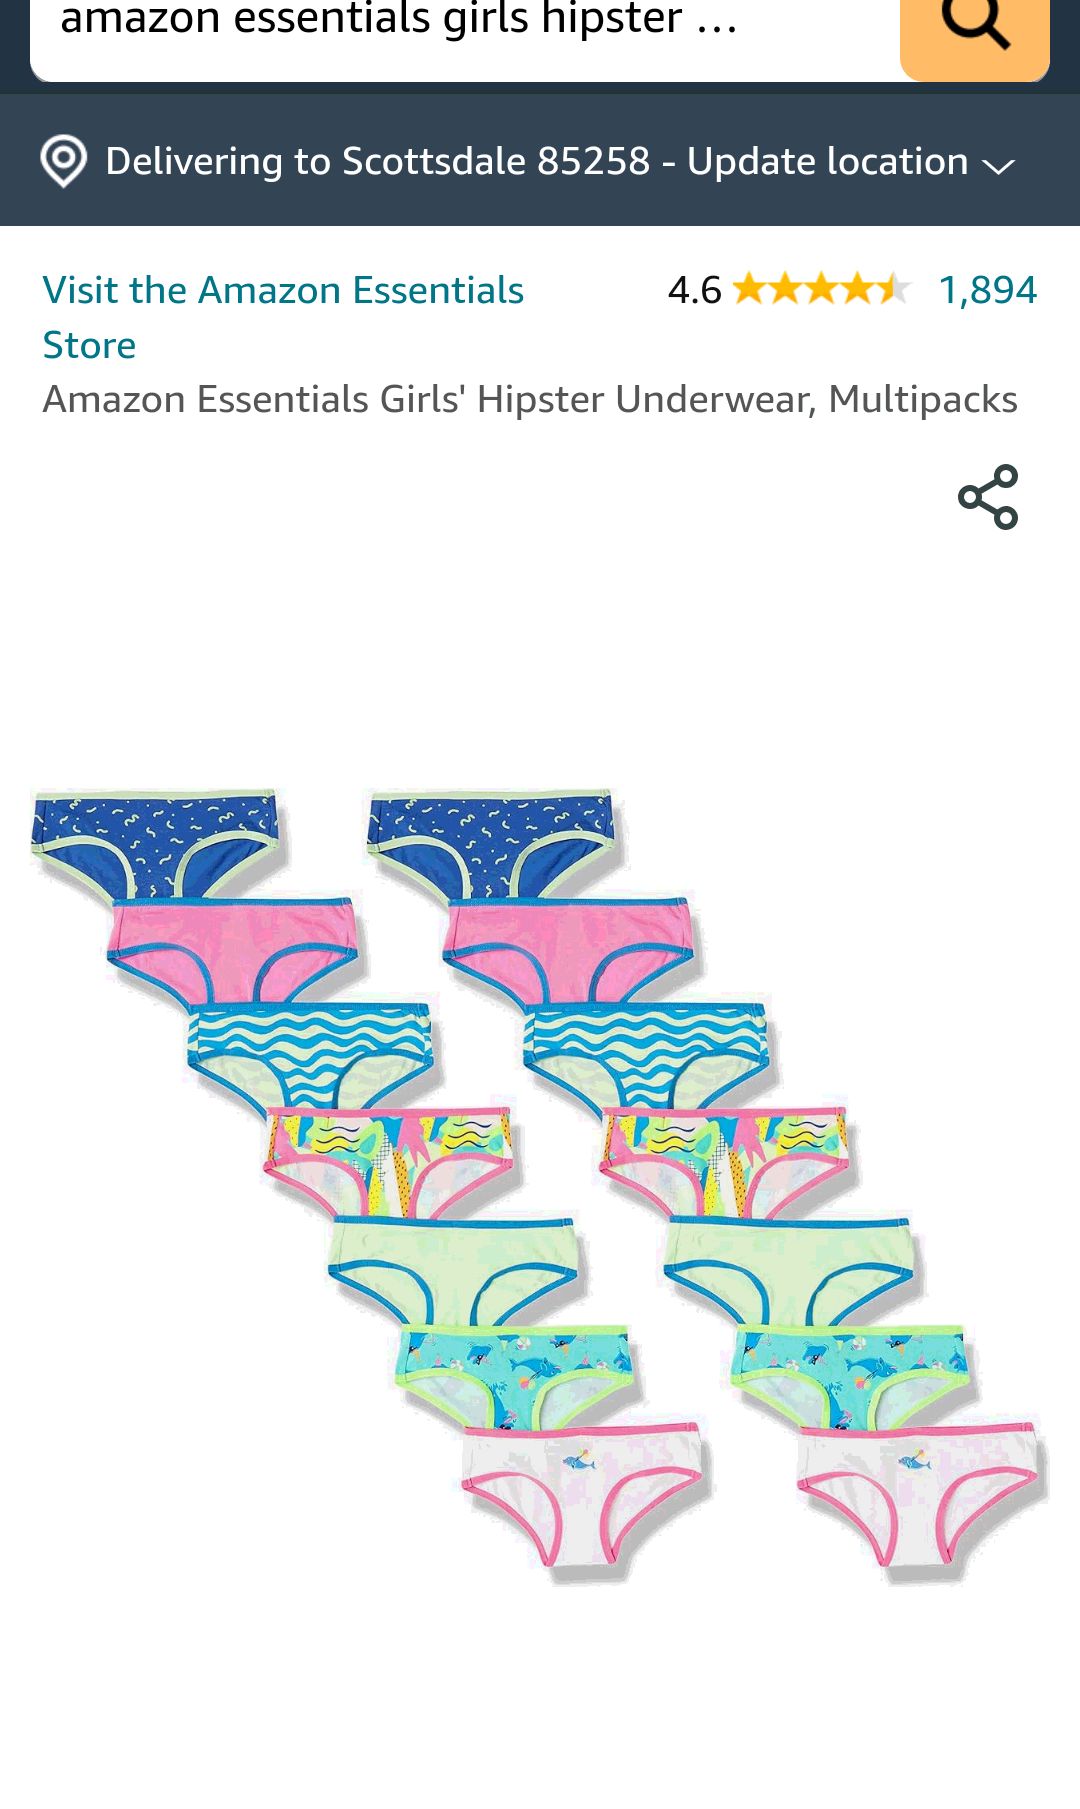 Amazon Essentials Girls' Hipster Underwear, Pack of 14, Multicolor/Animal/Stripe, Medium : Clothing, Shoes & Jewelry